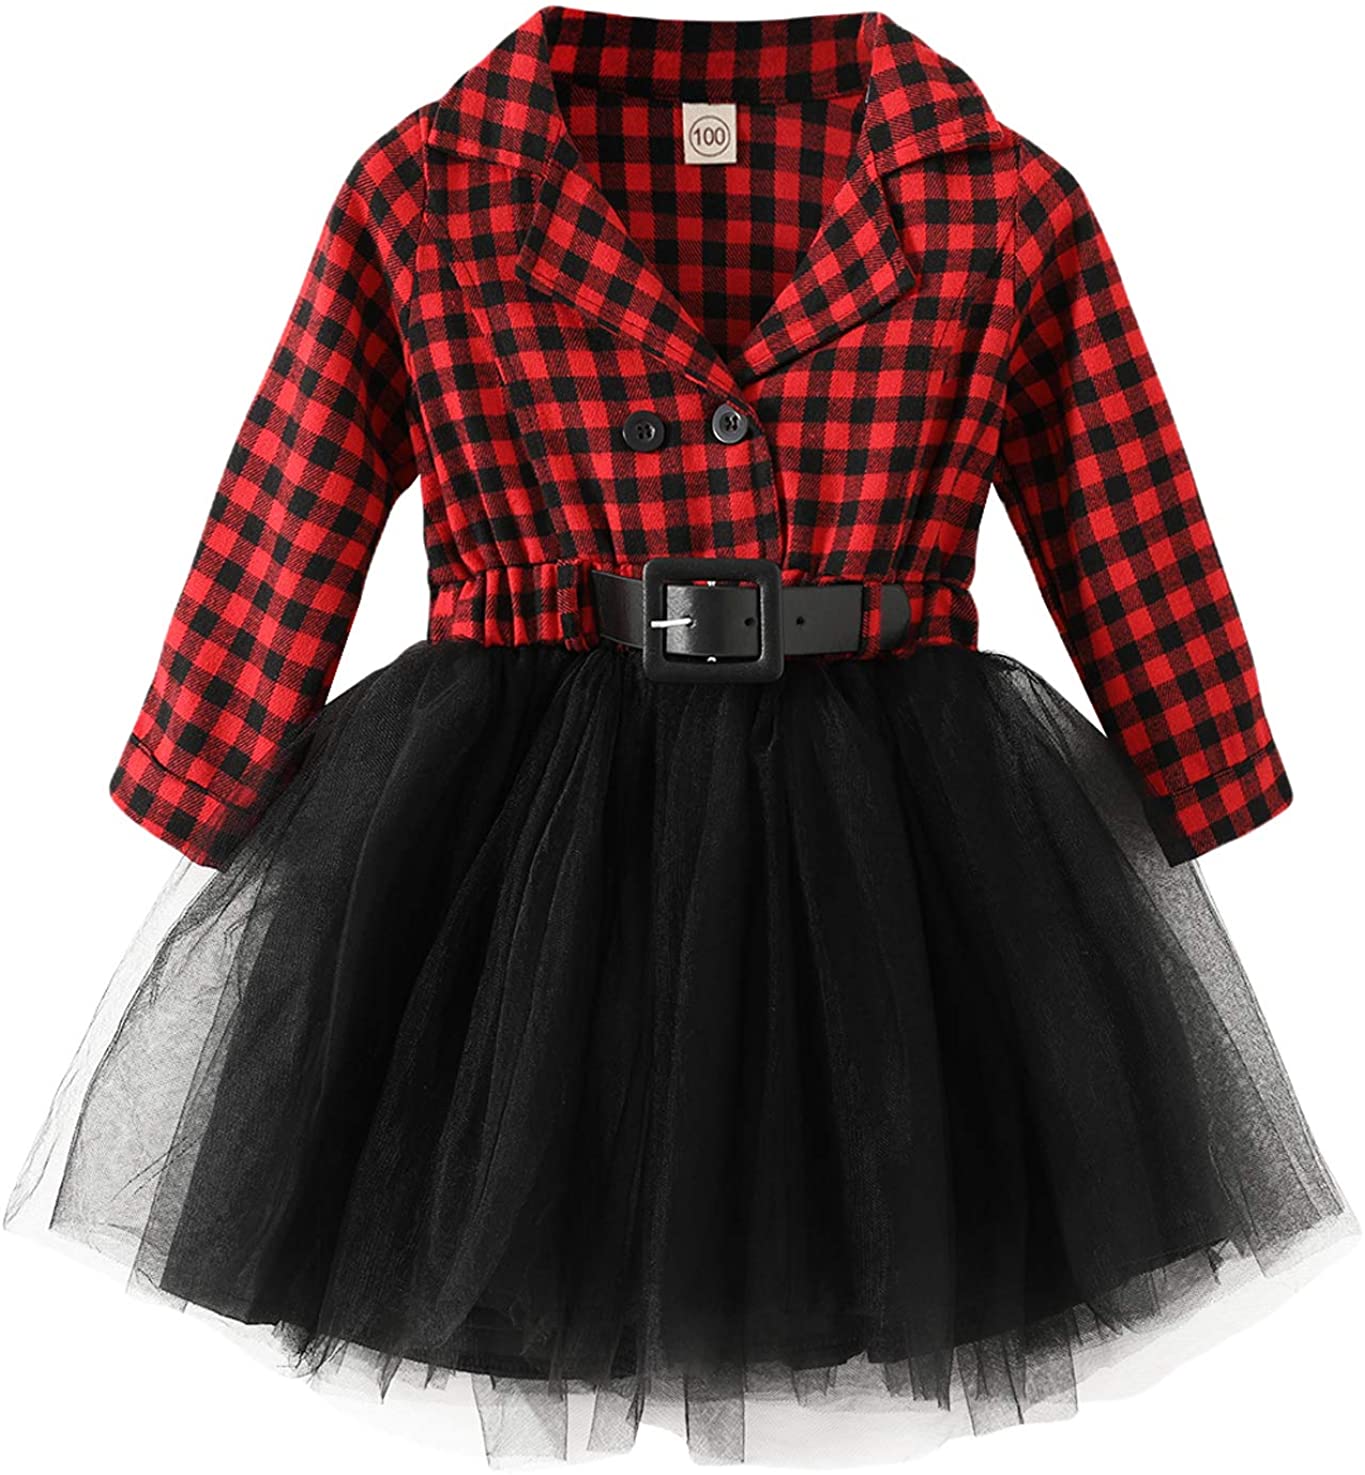 Little Kids Baby Girl Dresses Red Plaid Tutu Skirt Party Princess Formal Outfit Clothes 